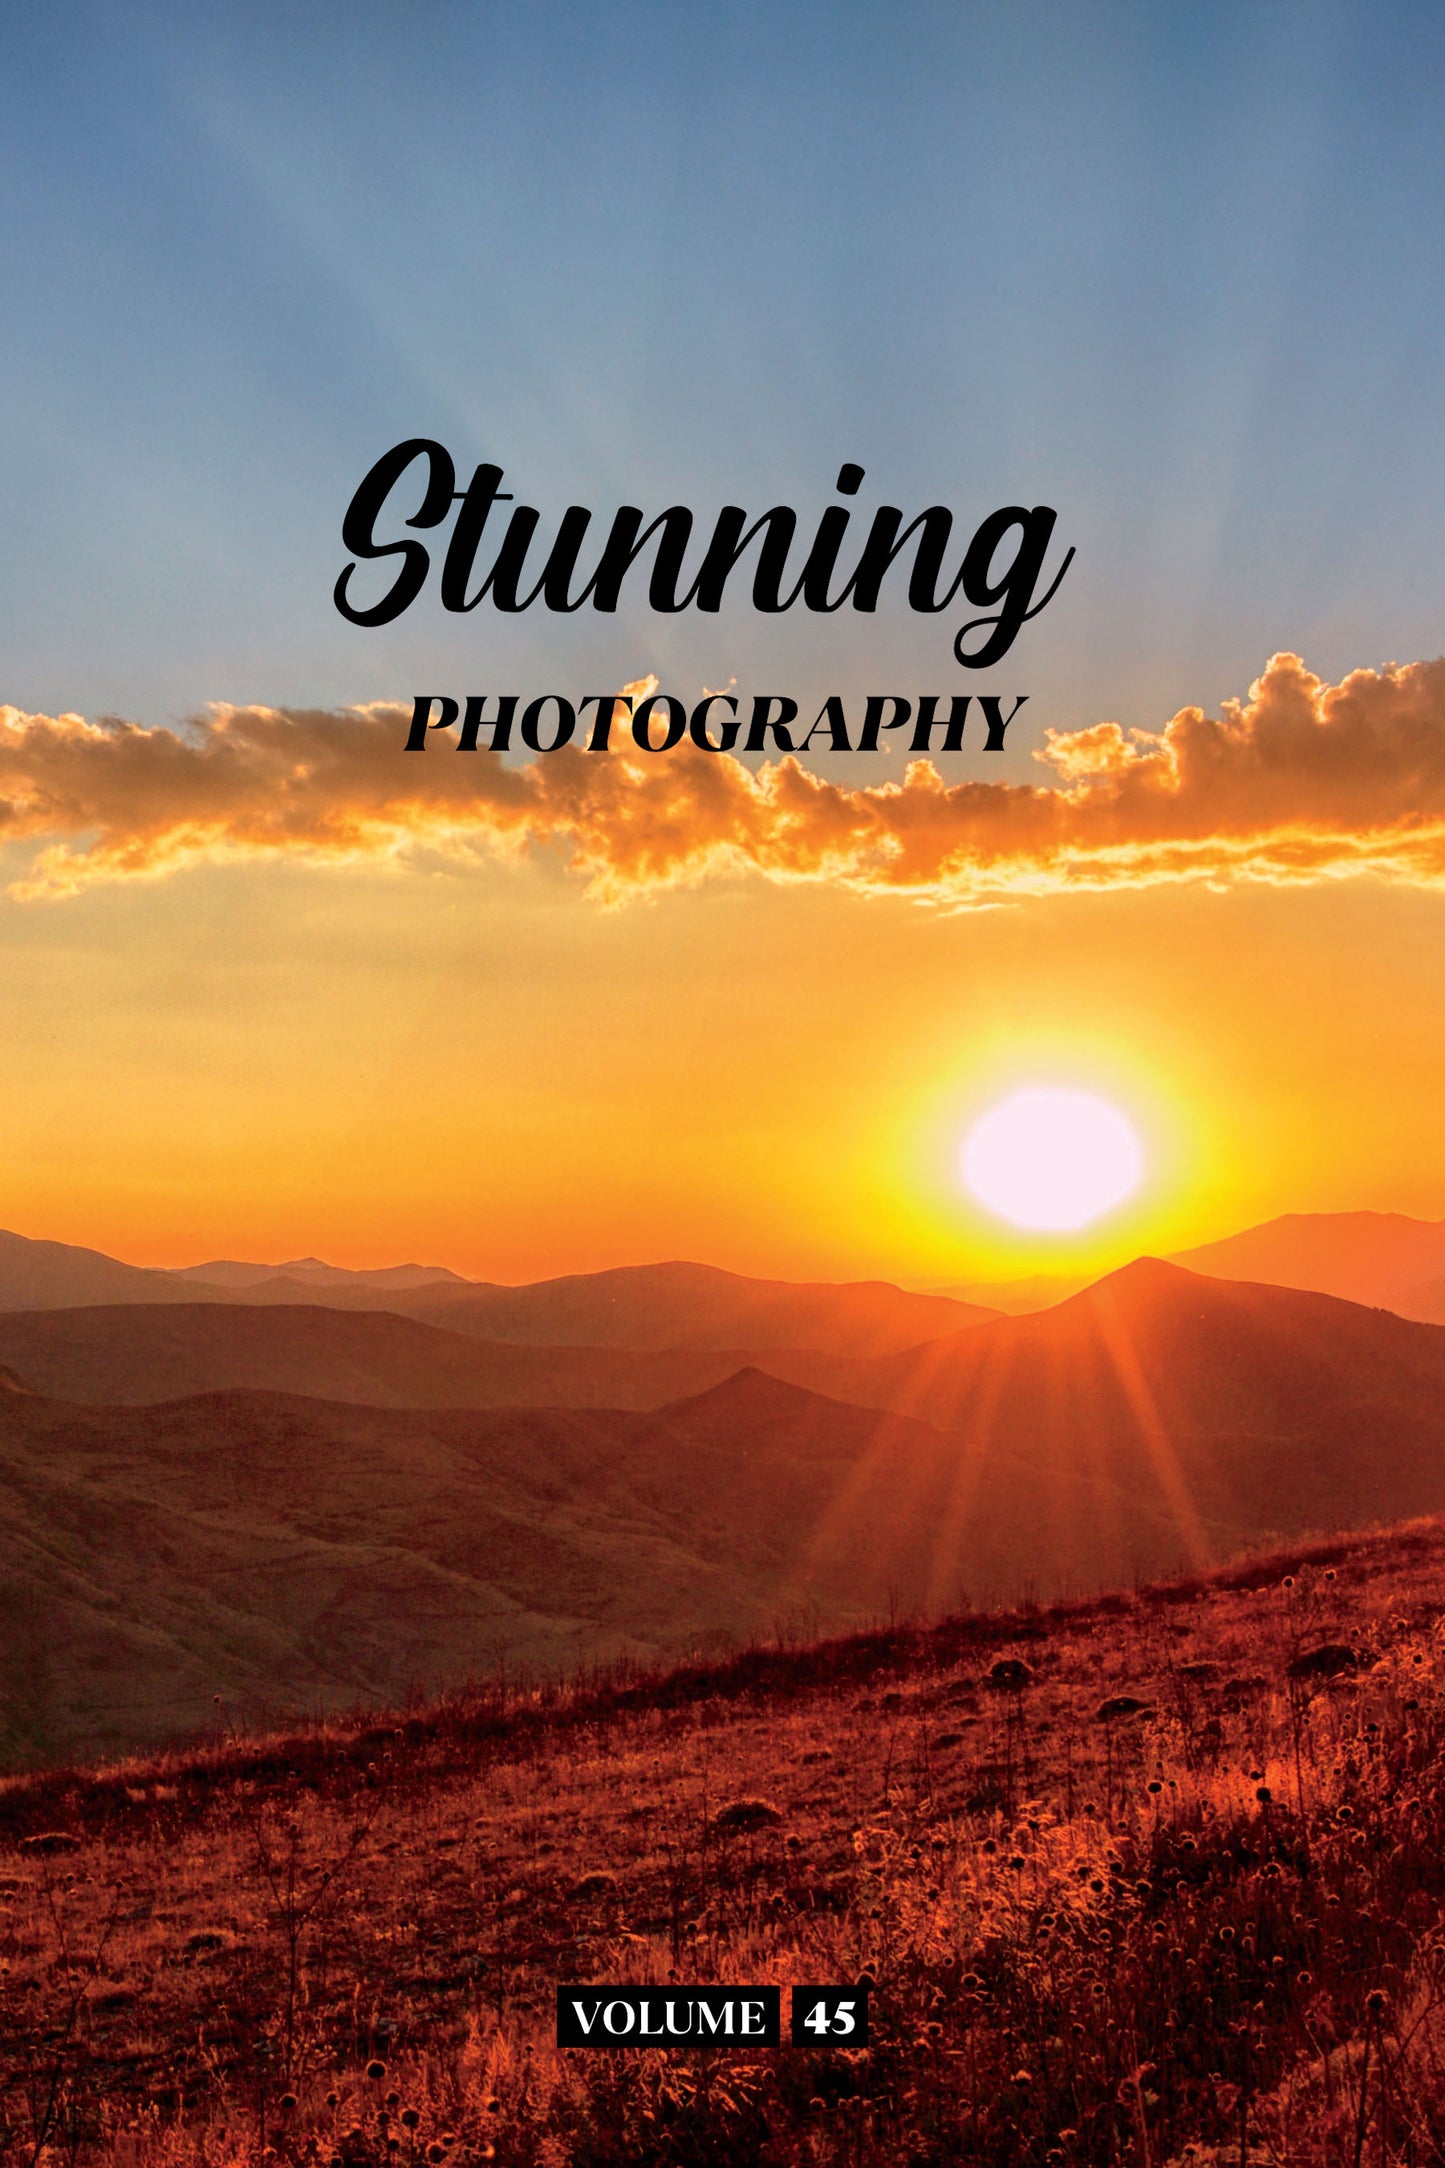 Stunning Photography Volume 45 (Physical Book Pre-Order)